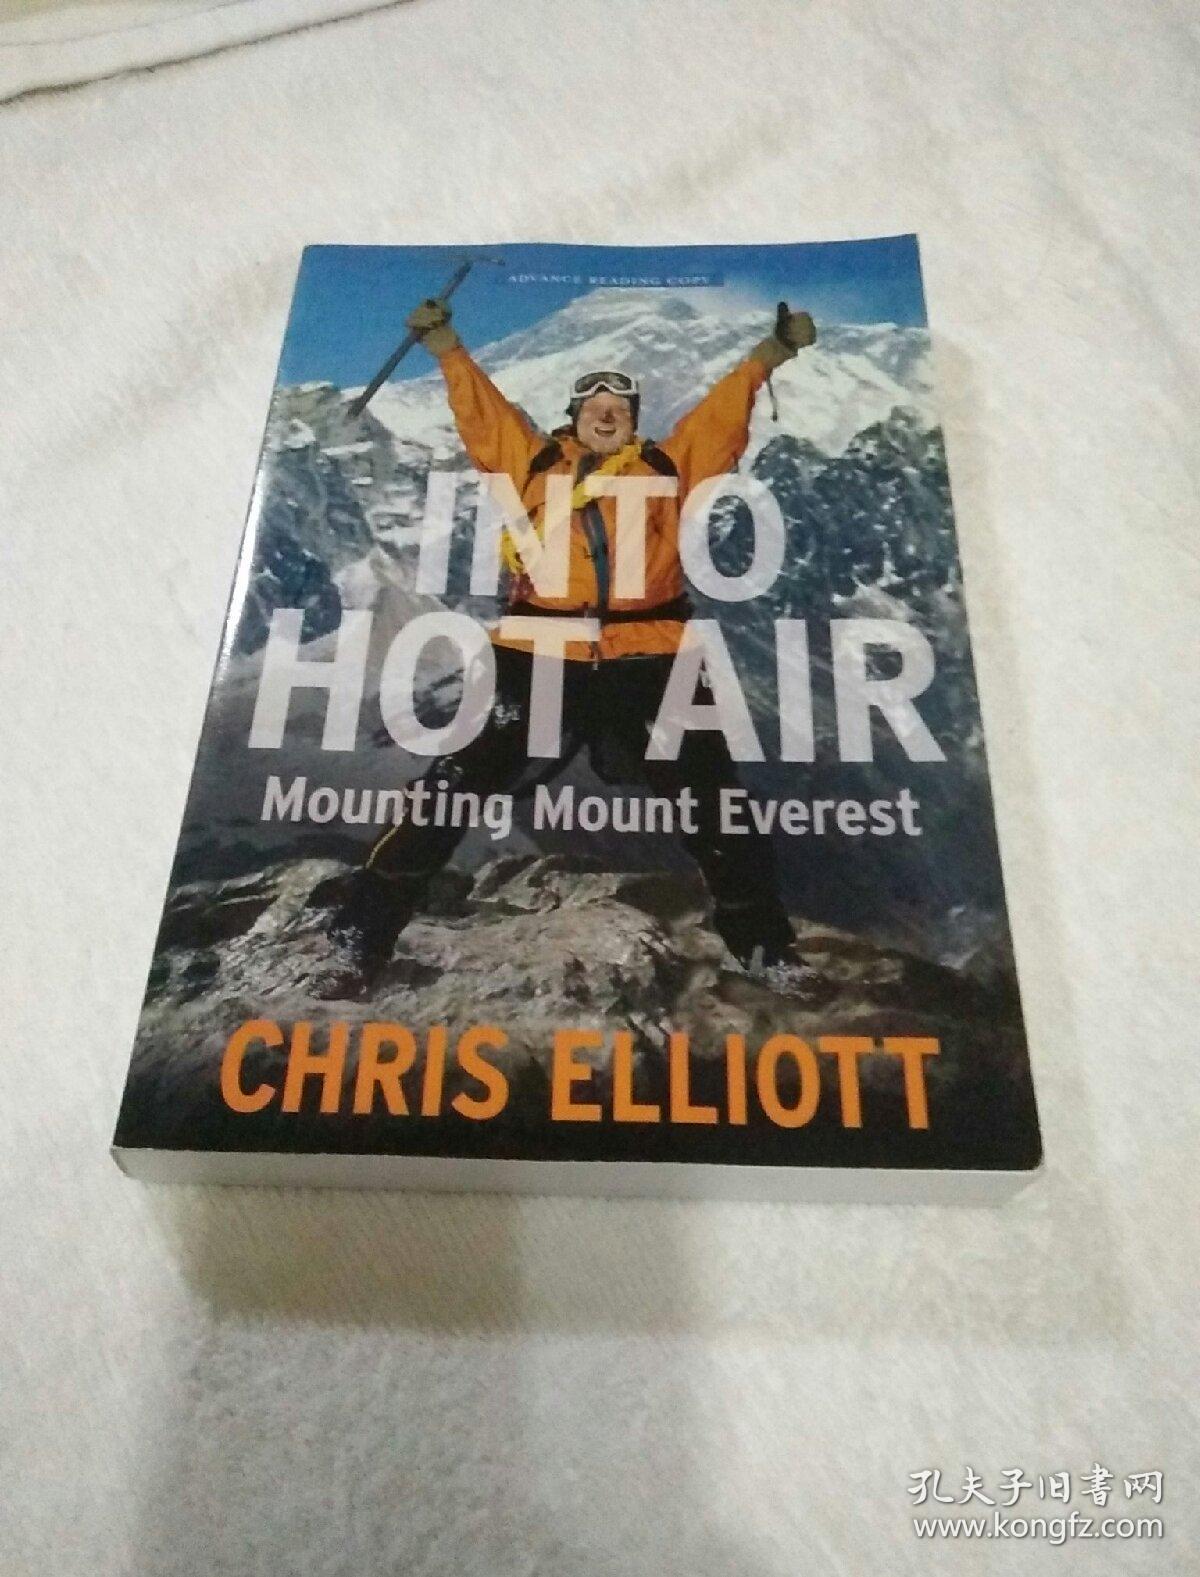 Into Hot Air: Mounting Mount Everest Another 